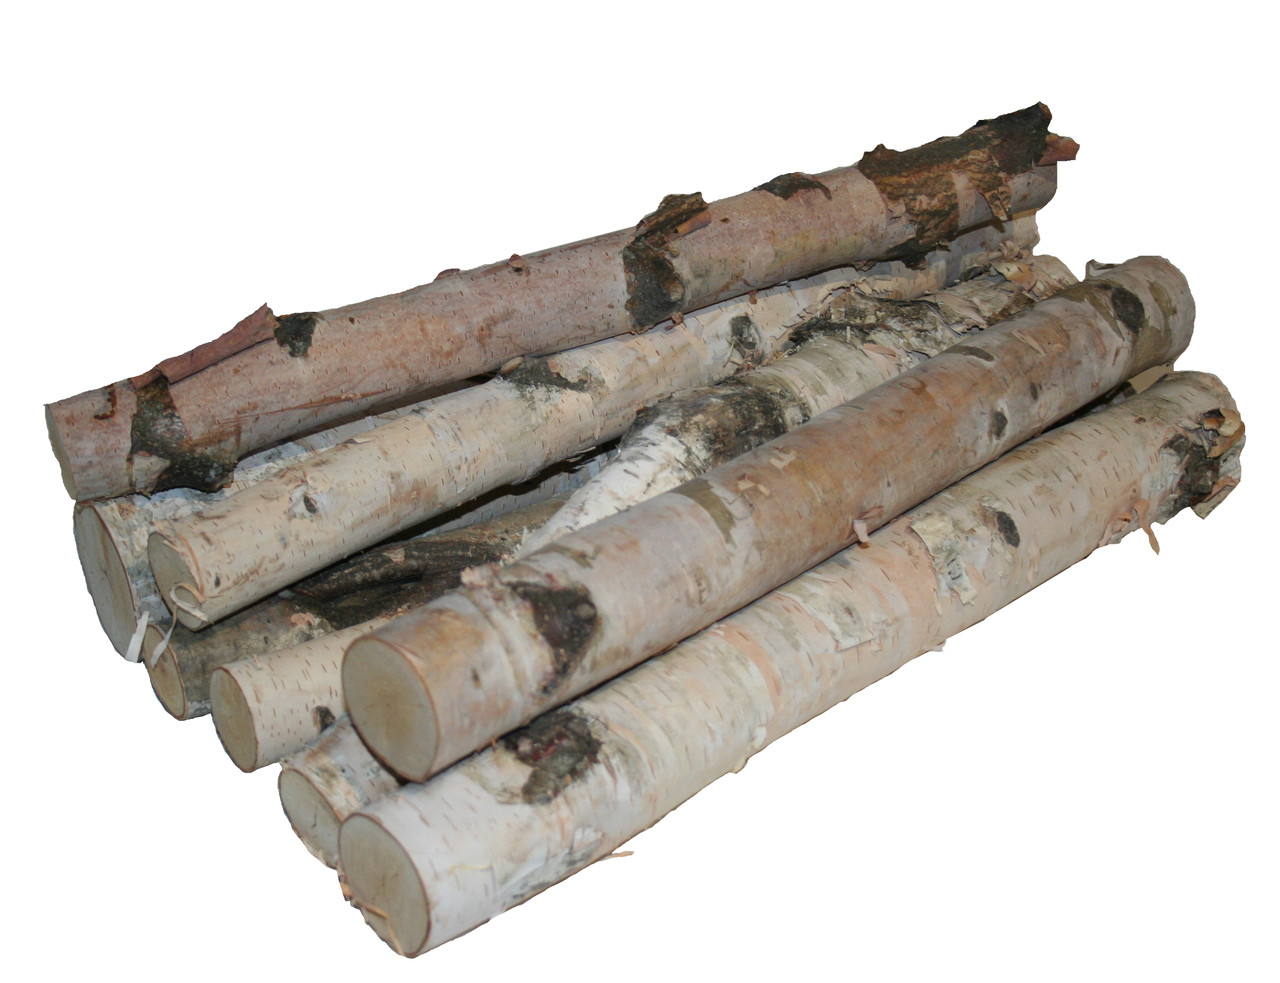 White Birch logs, 4 count, varies 3 inches to 4 inches long with